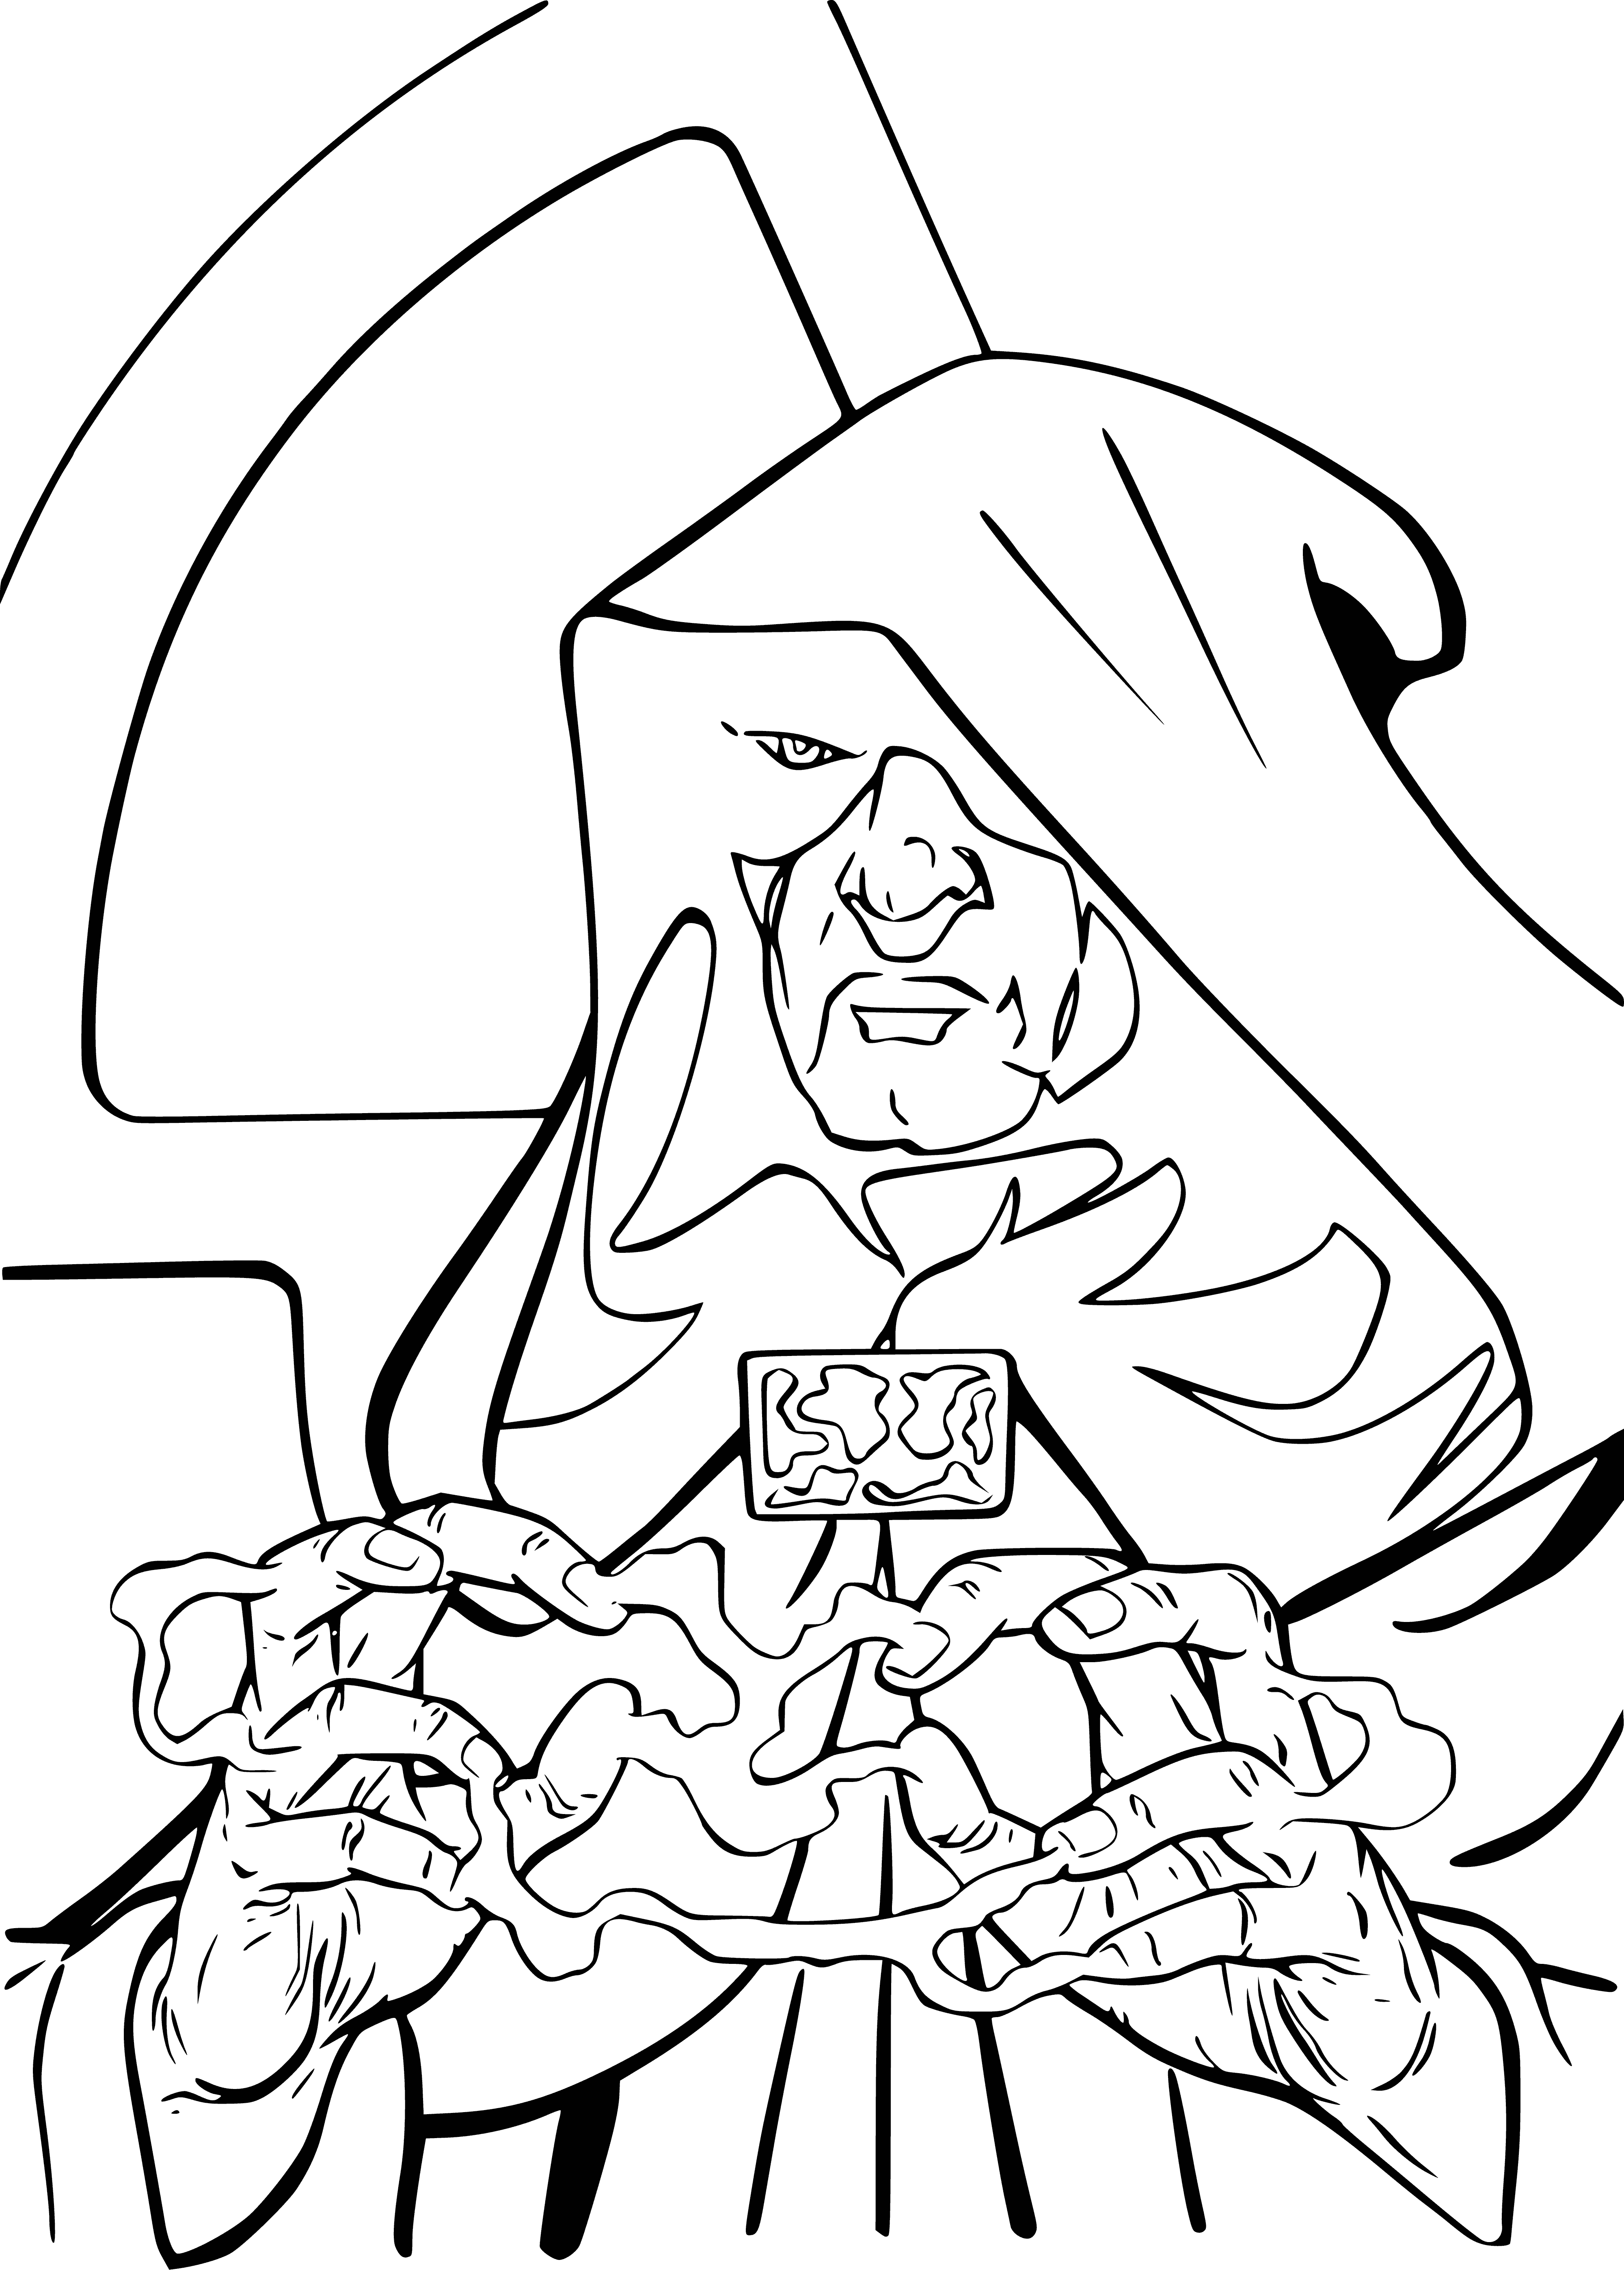 Chancellor Palpatine coloring page